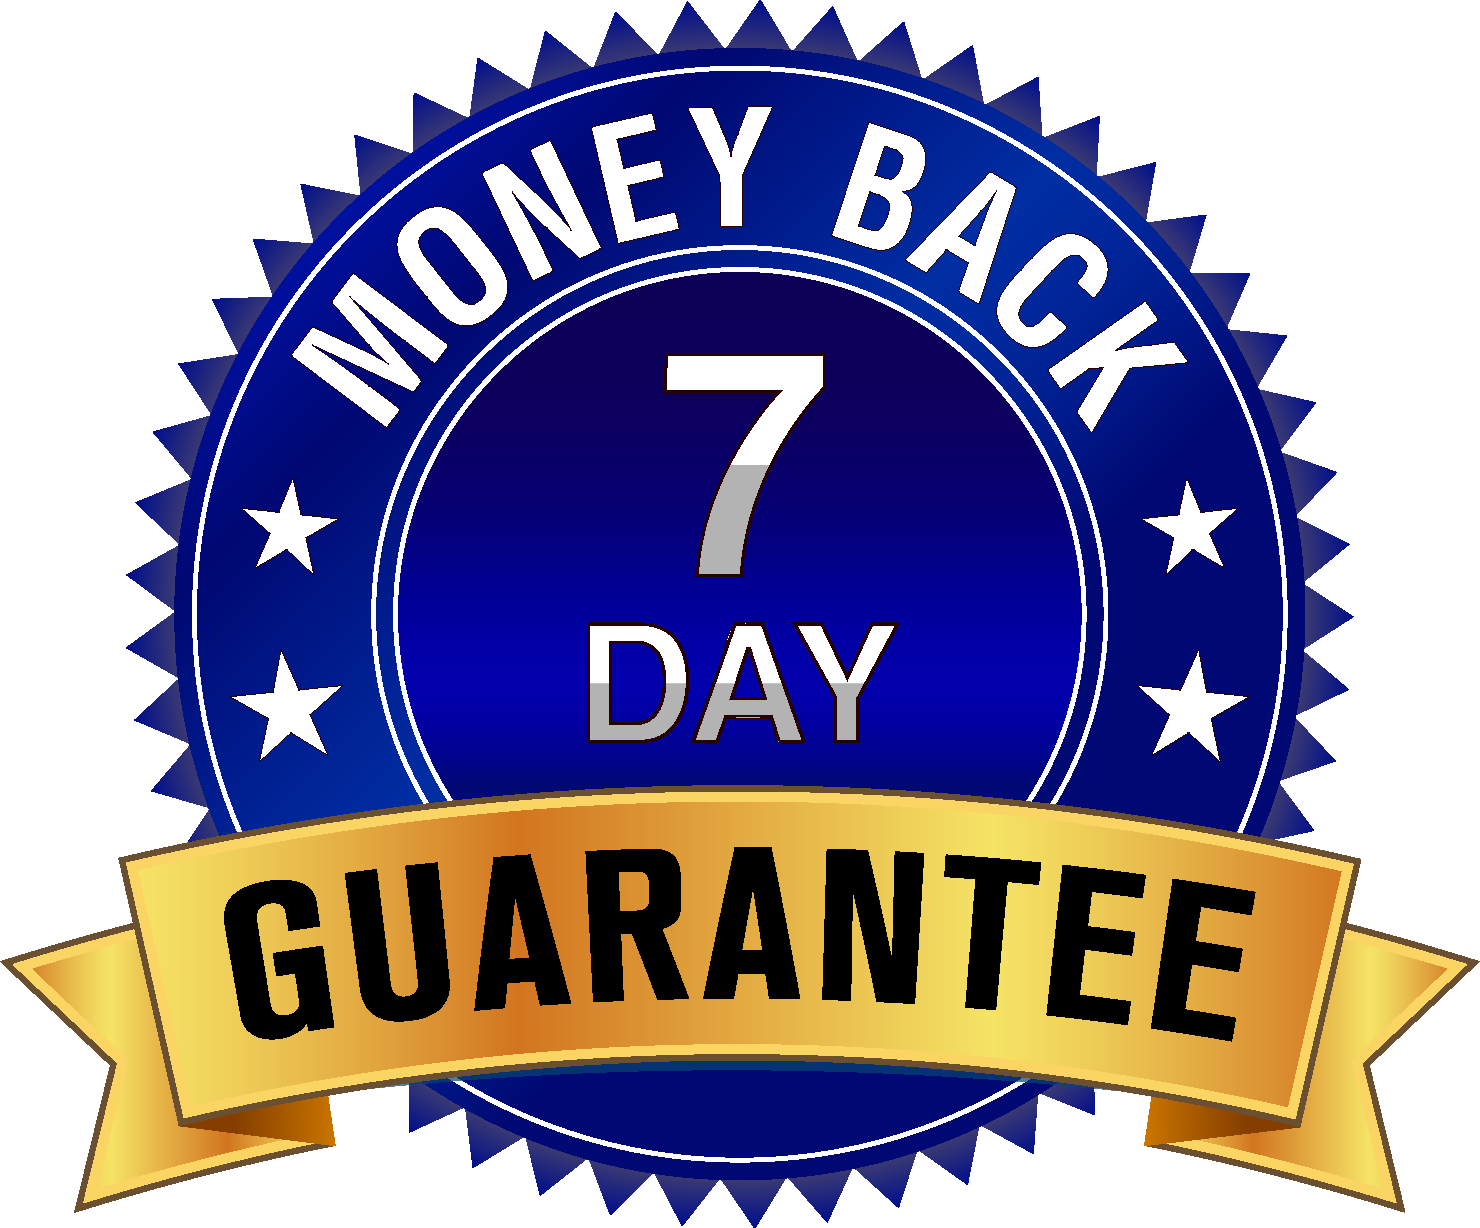 Click for 7 Day Money Back Guarantee Information